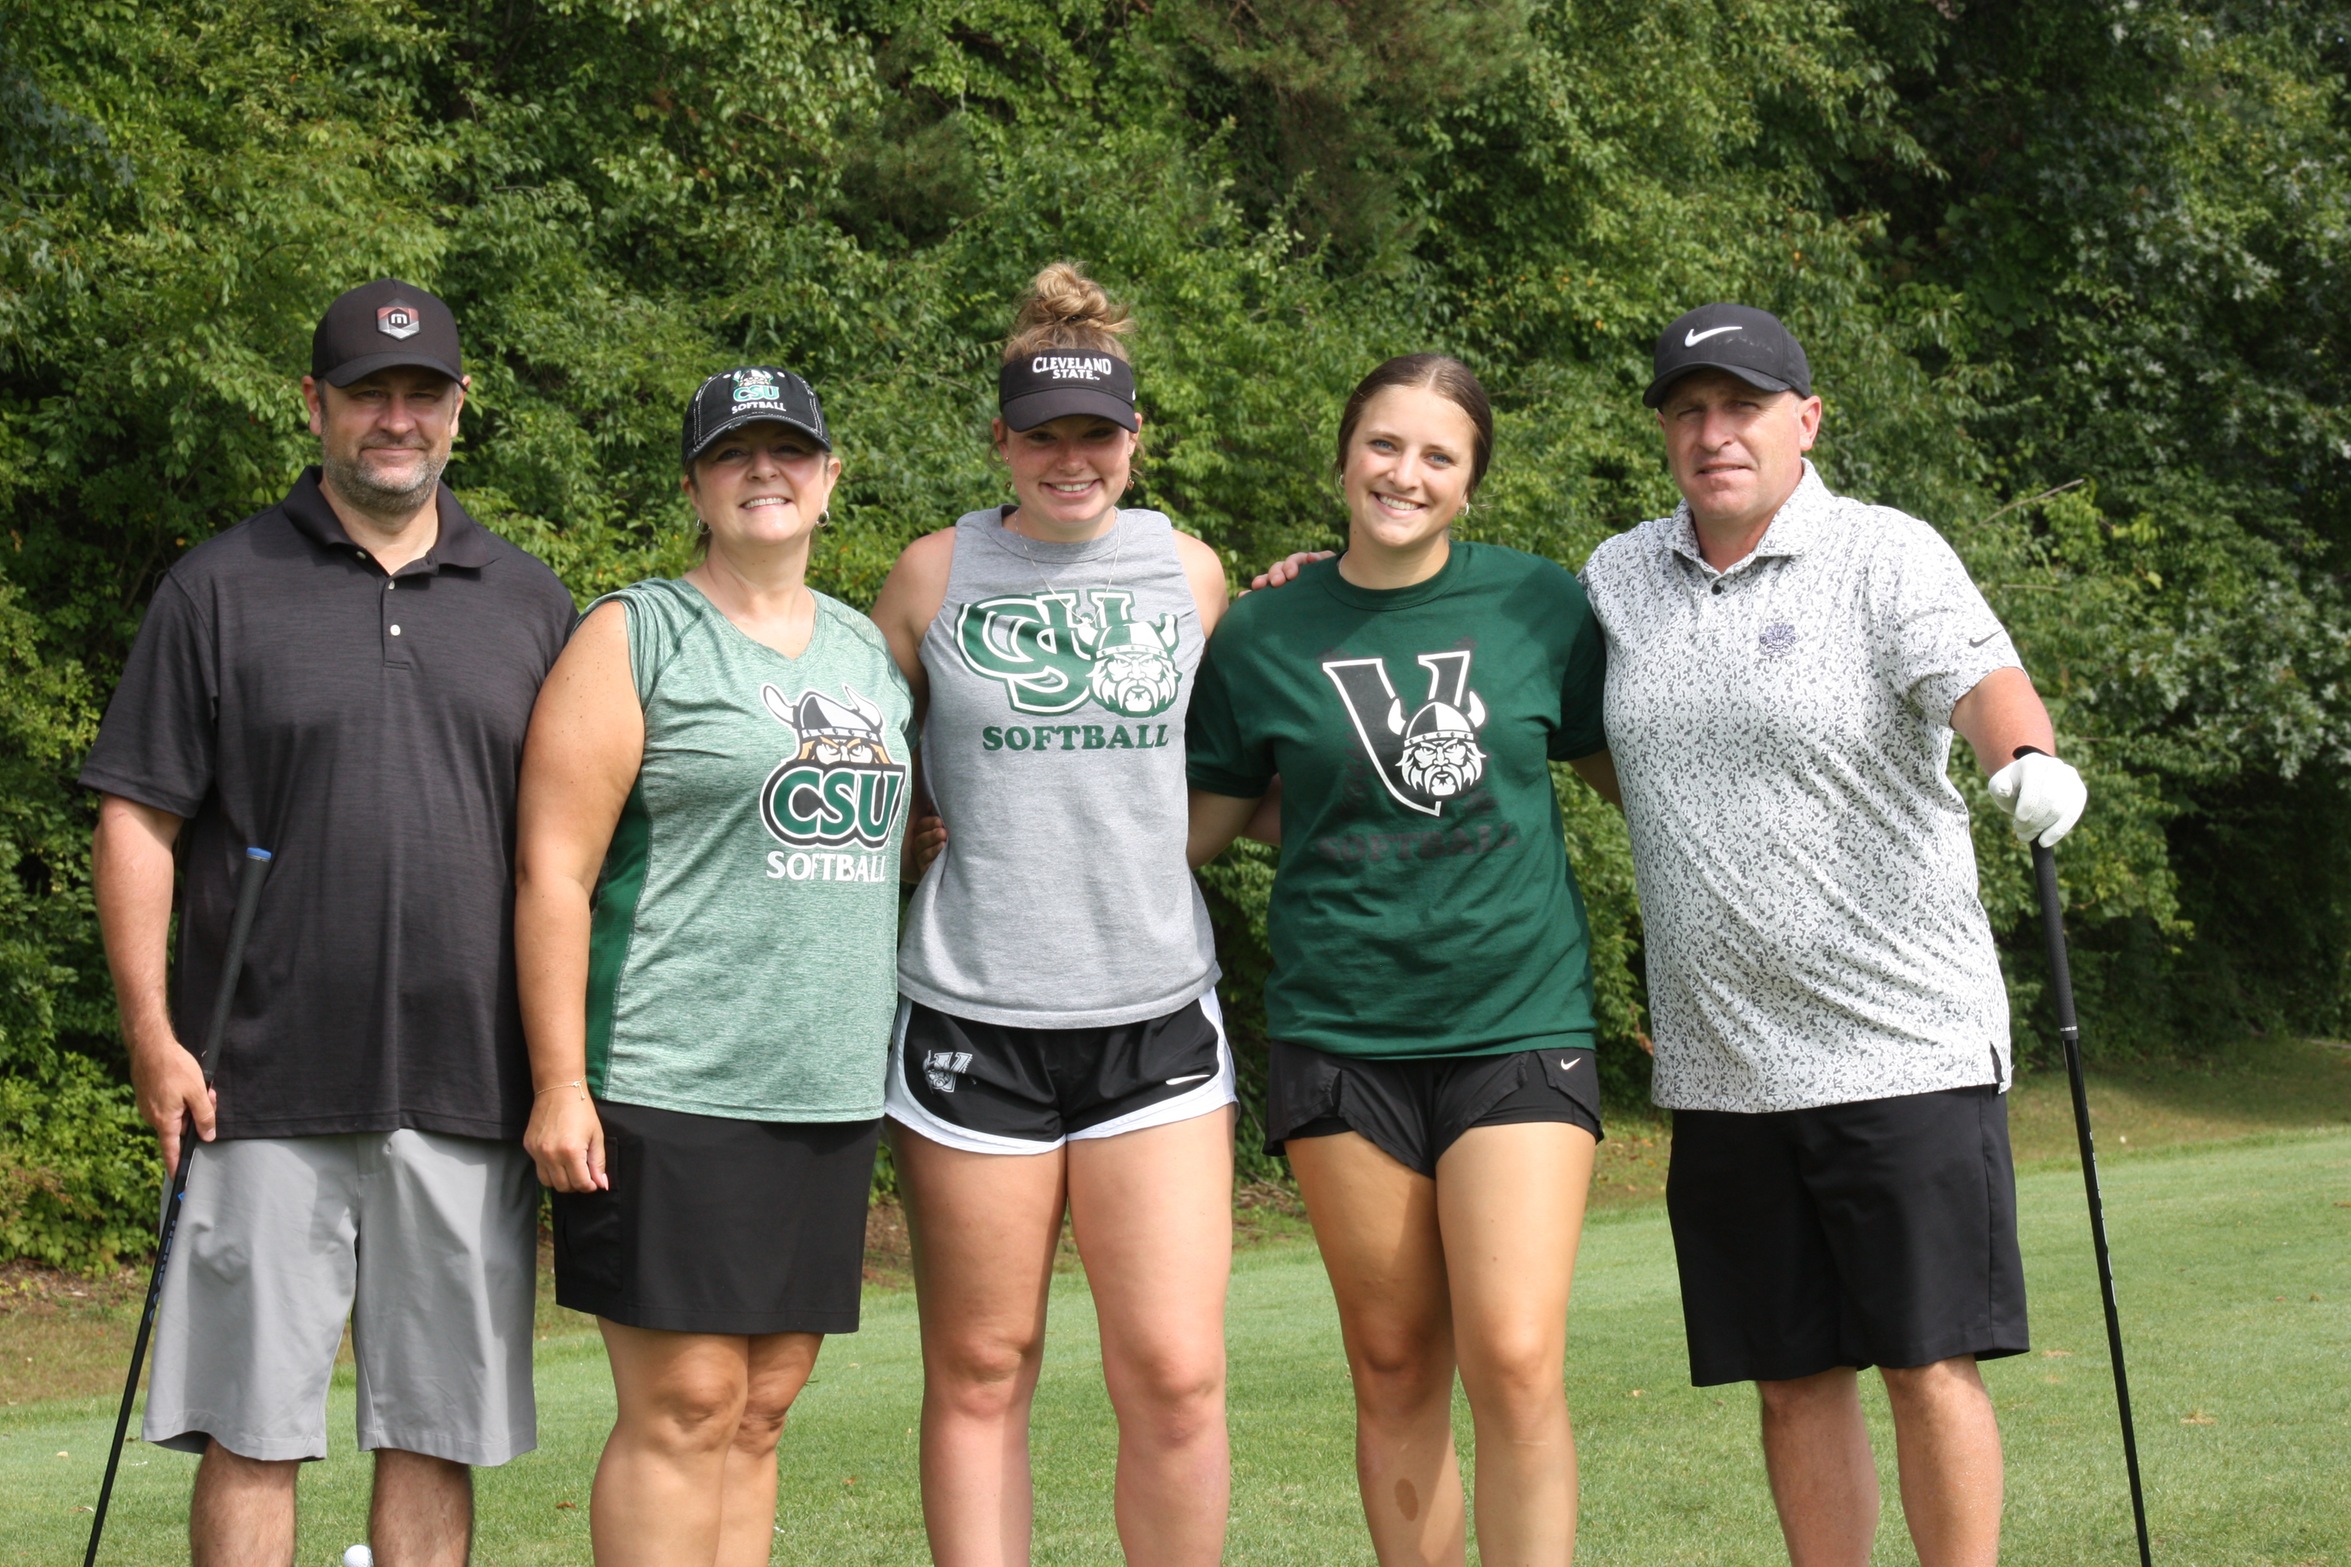 Fun Times Had By All at Cleveland State Softball Golf Outing